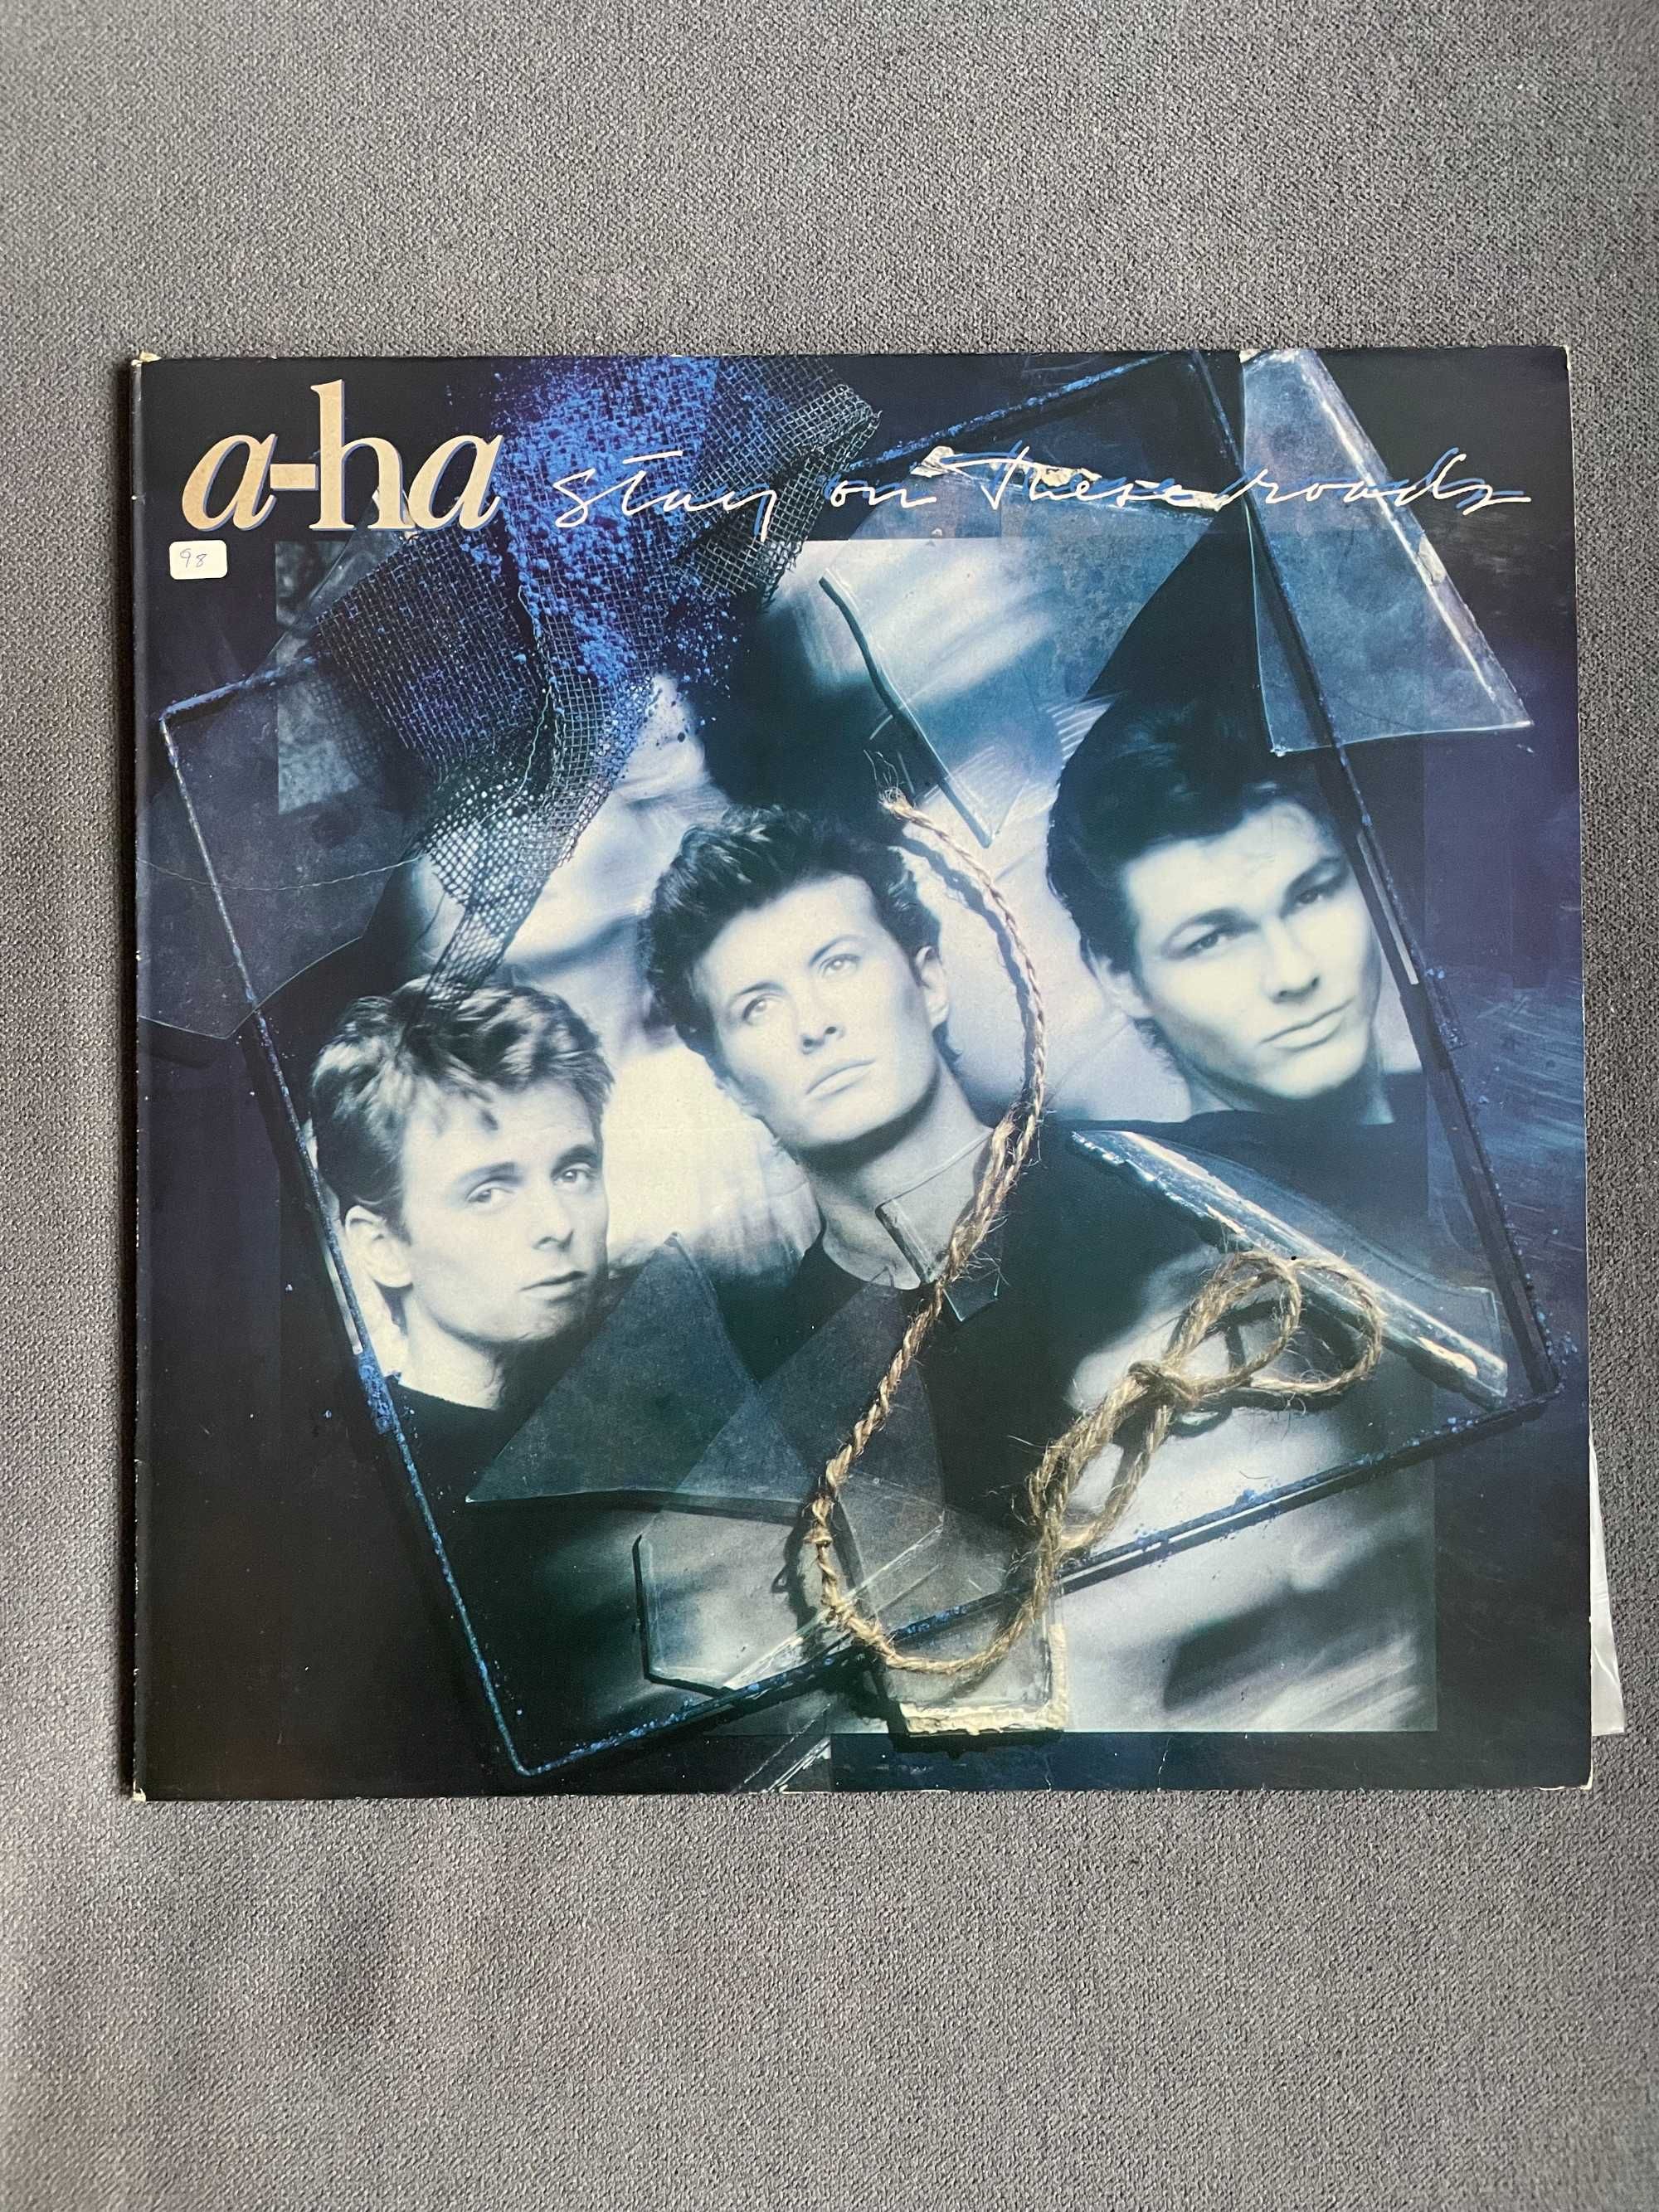 A-Ha ‎– Stay On These Roads